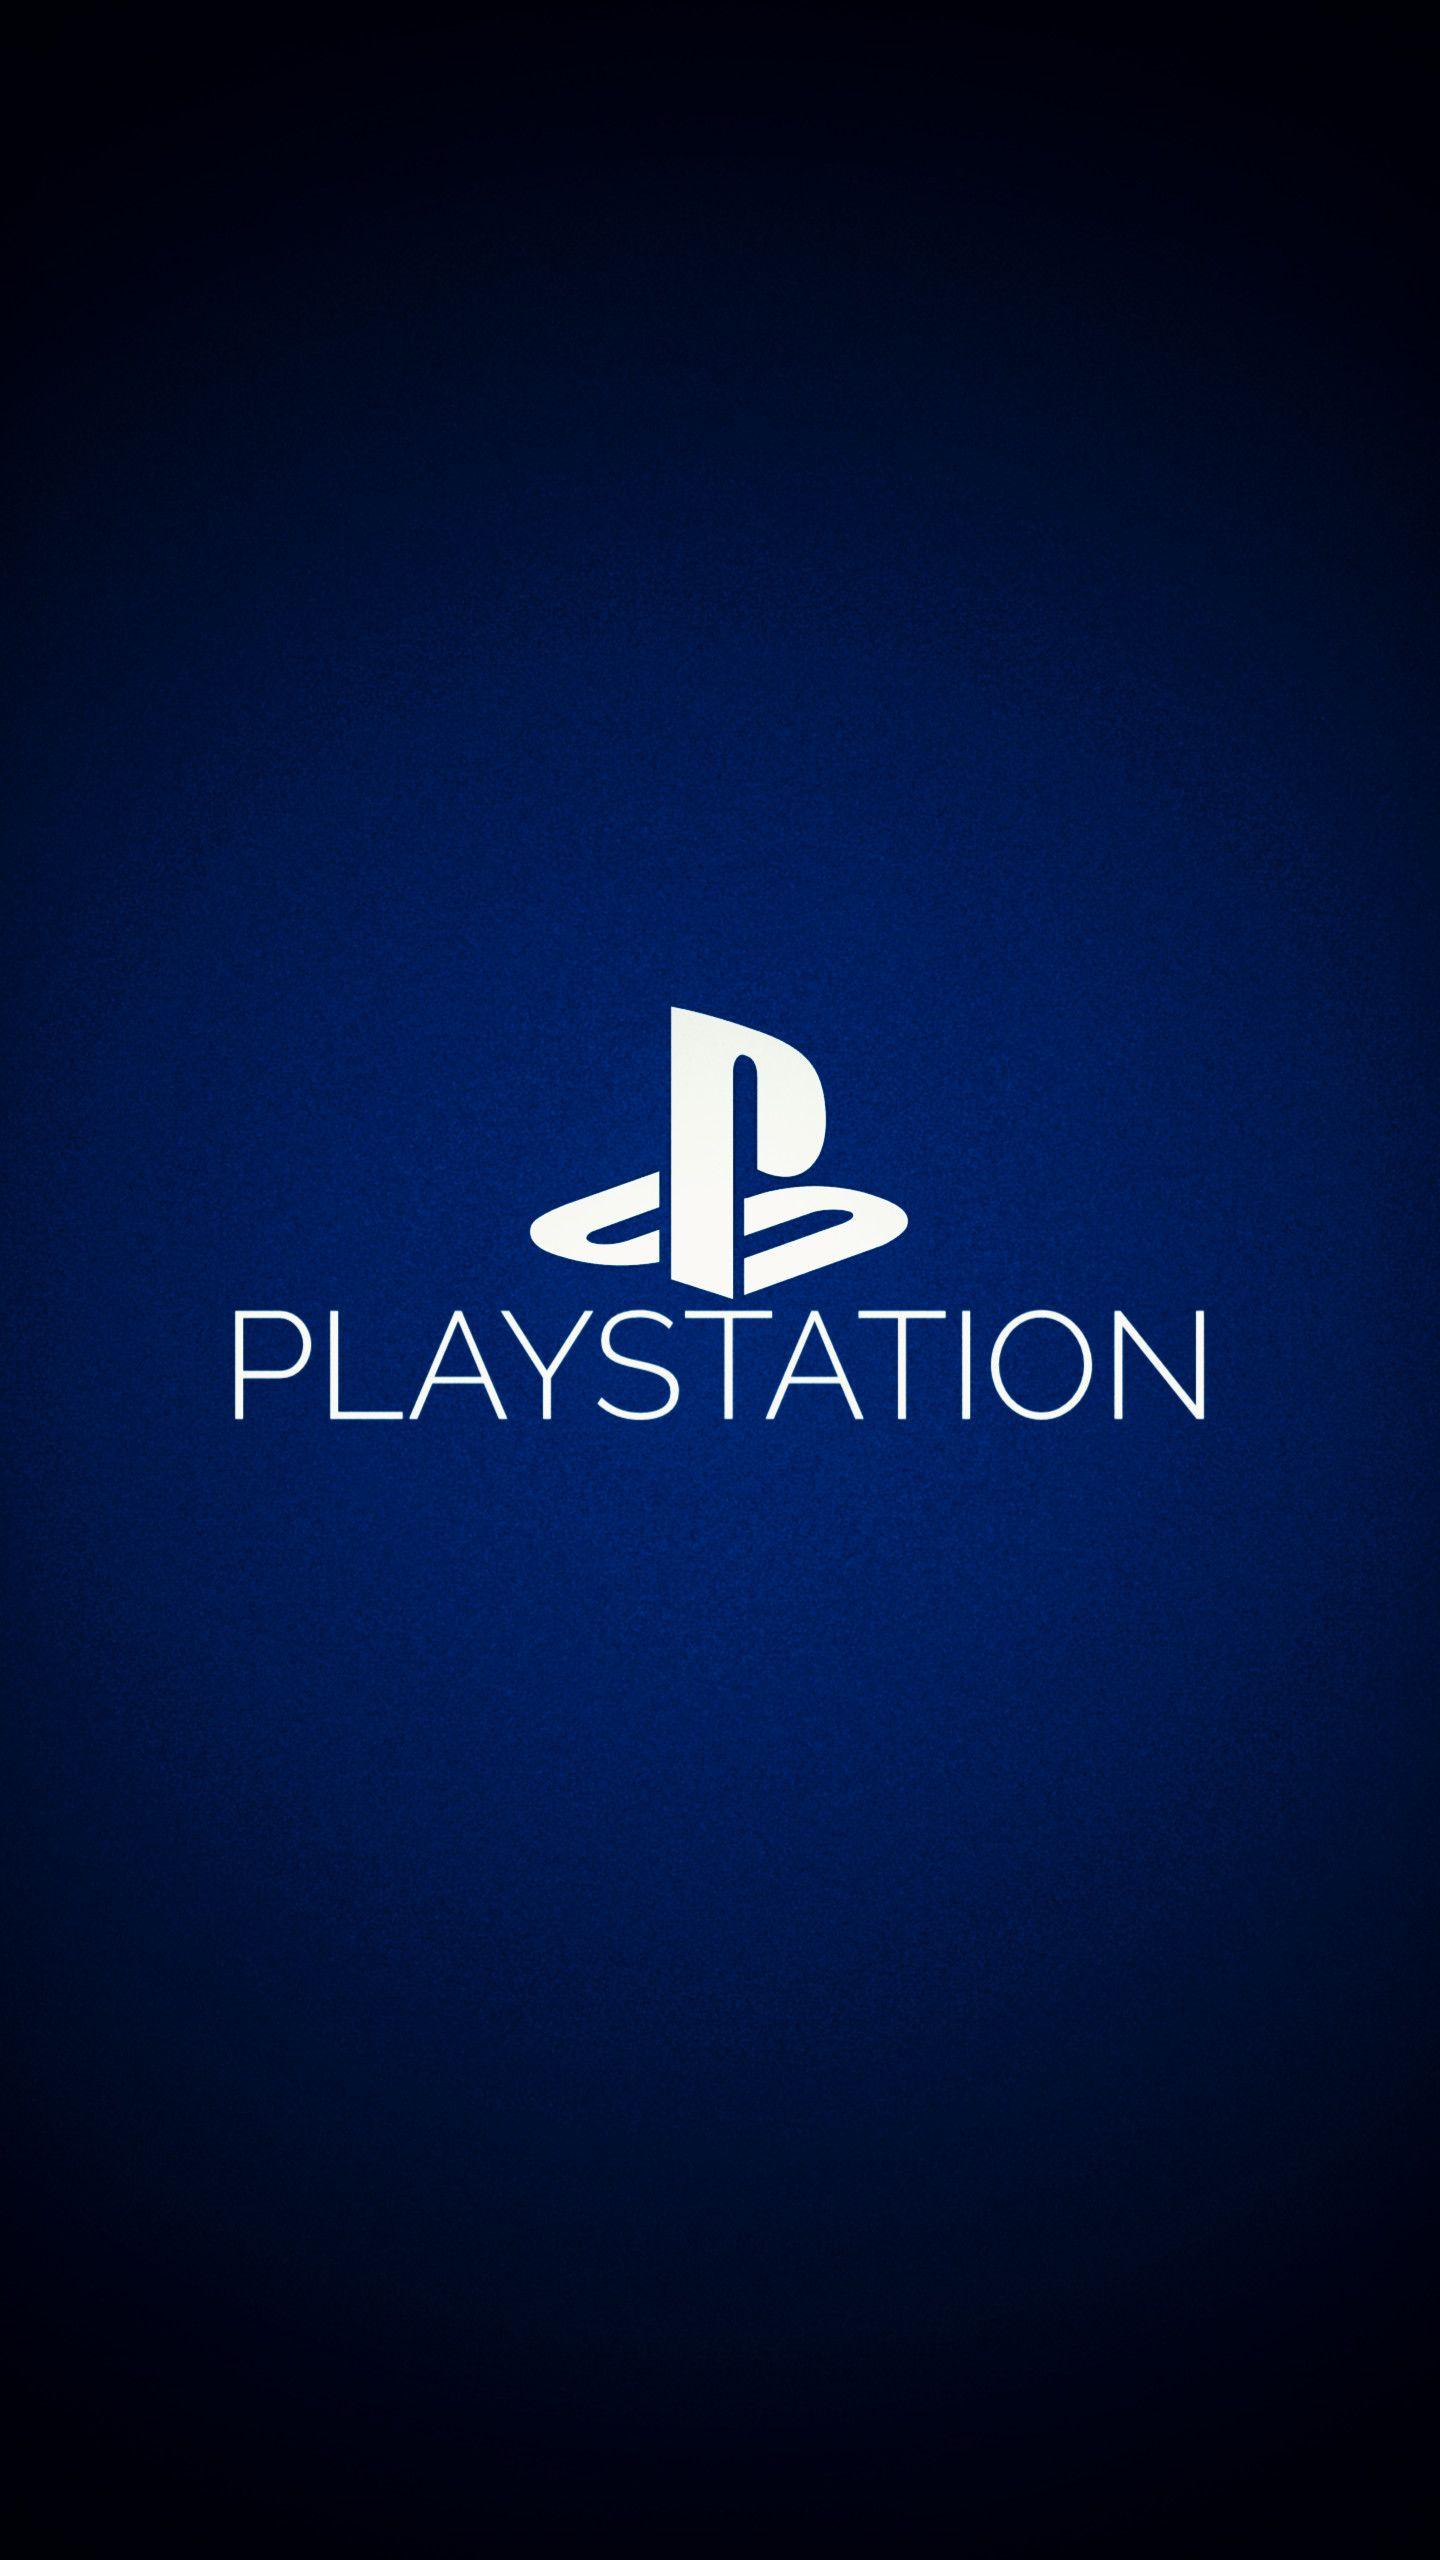 Related Wallpapers  Logo De Playstation 1  423x394 PNG Download  PNGkit